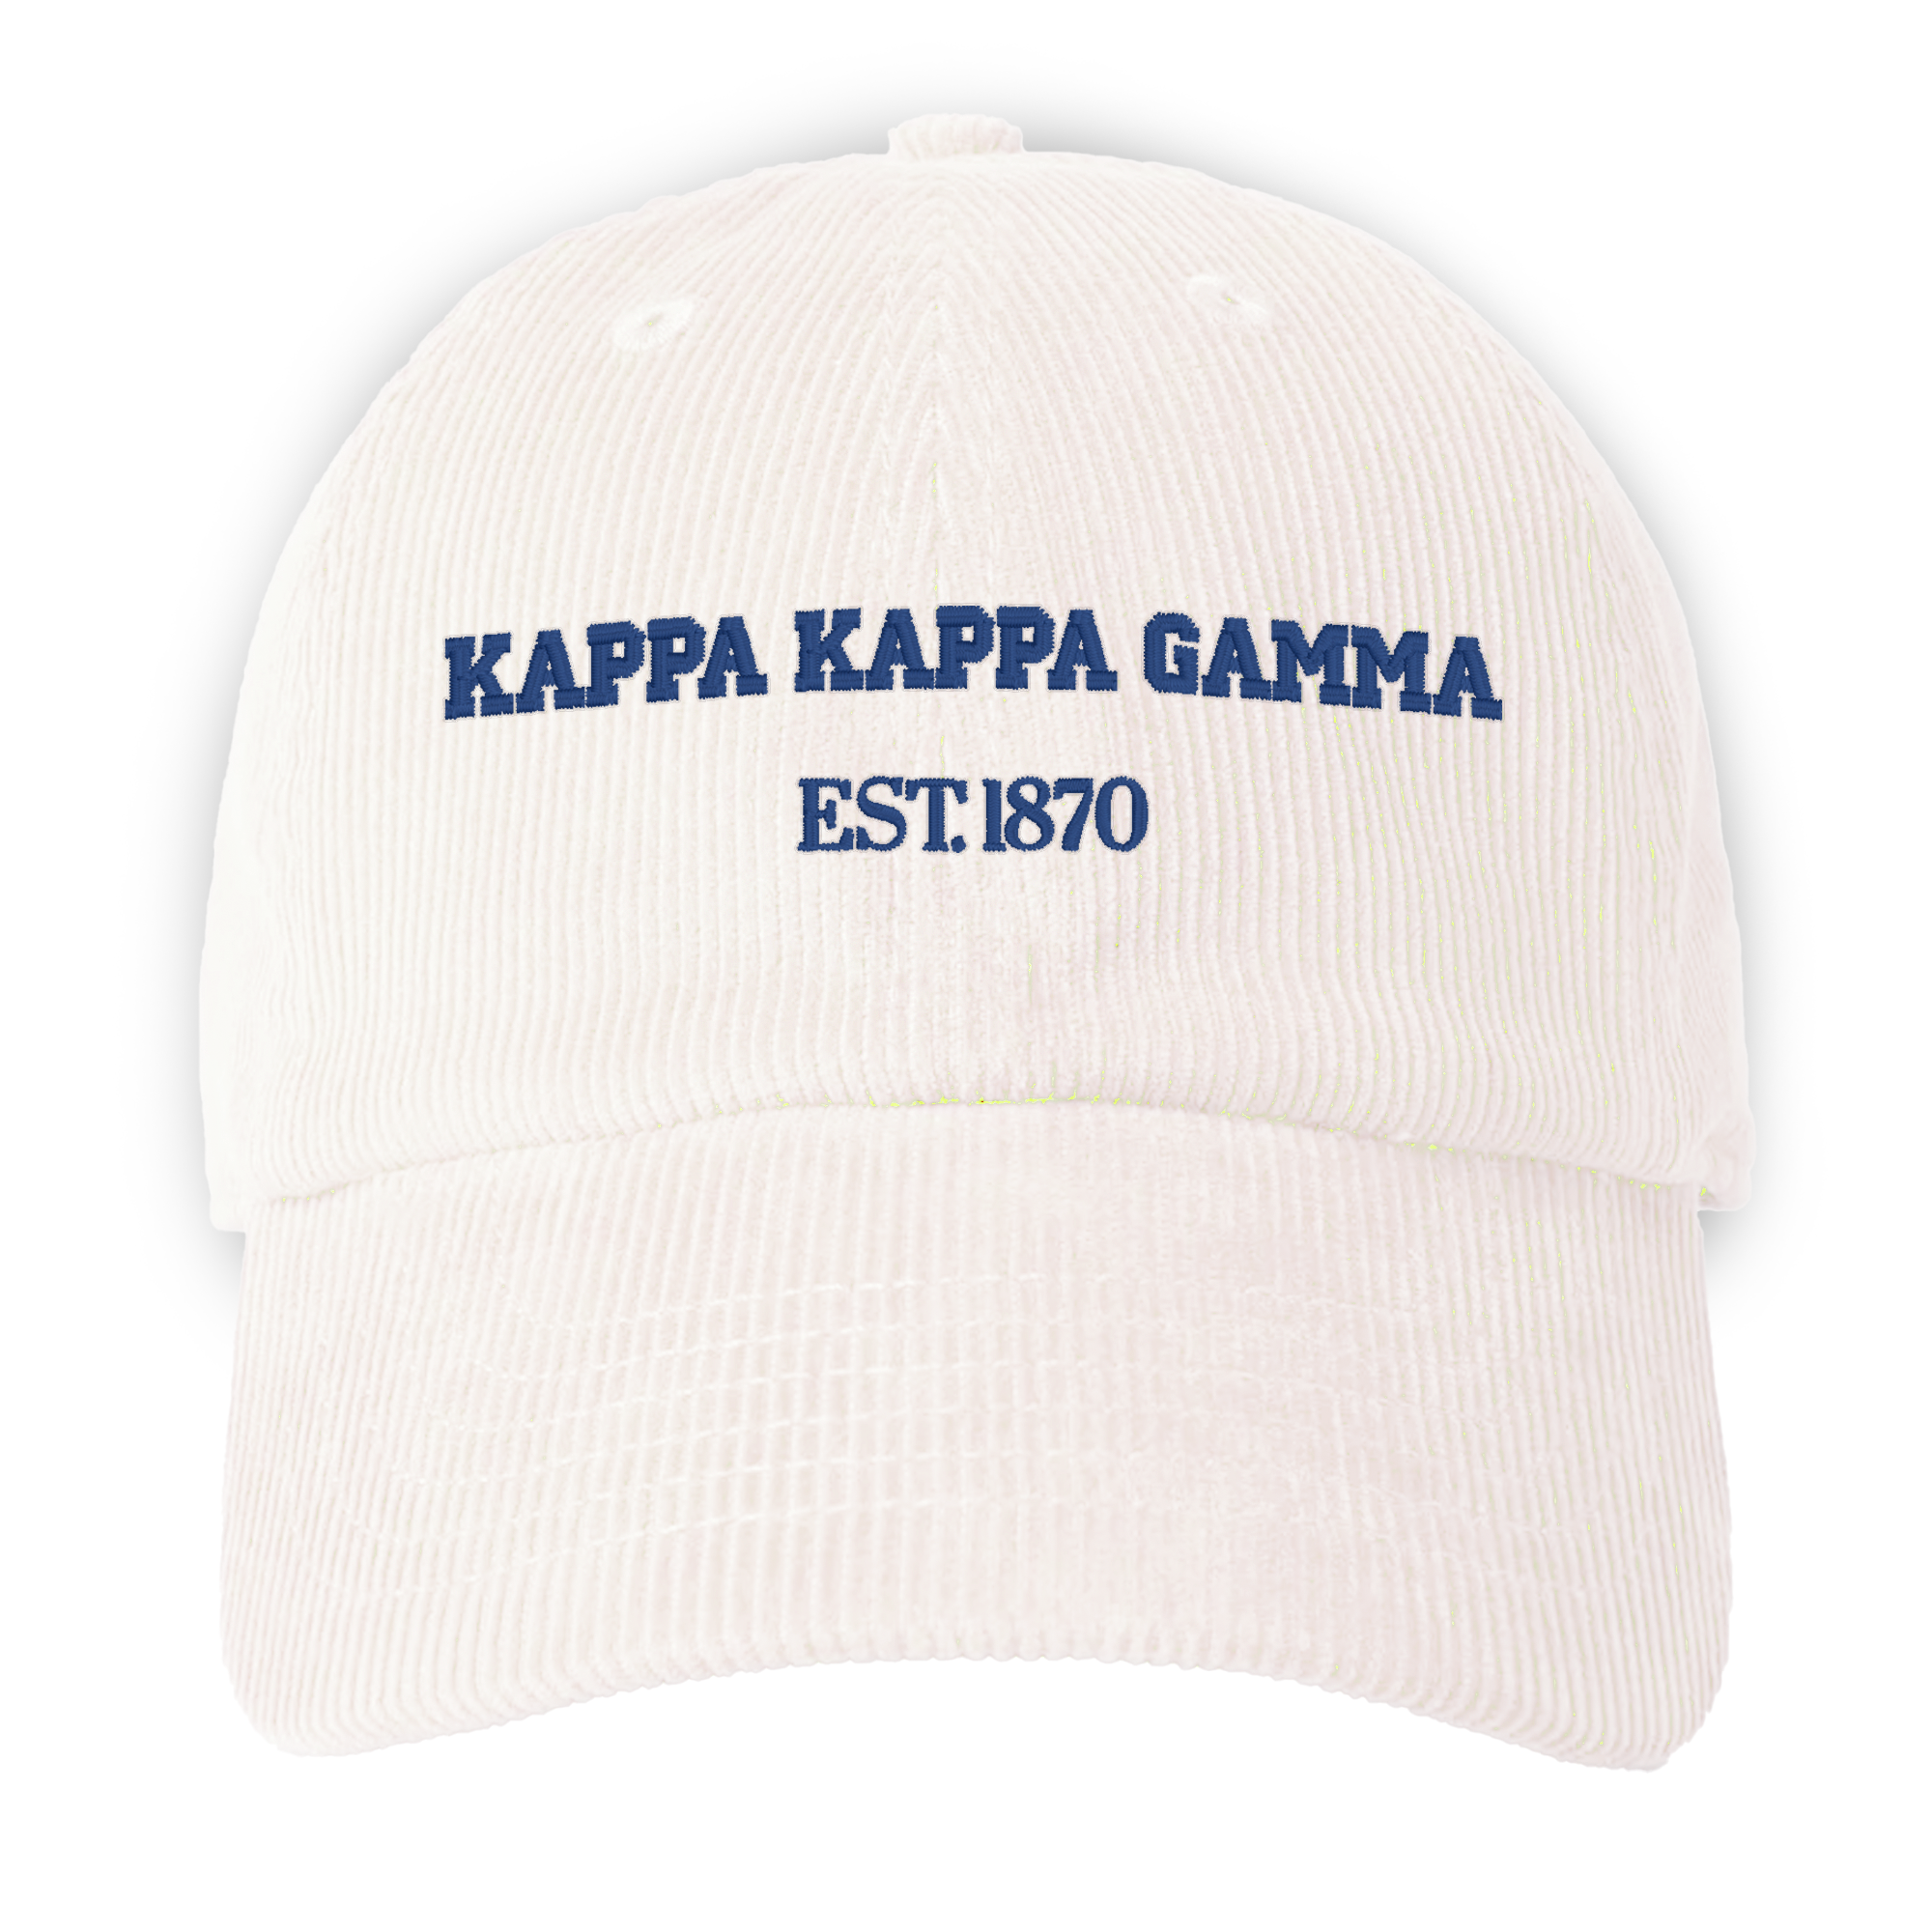 a white cap with the words kapa kapa gama on it